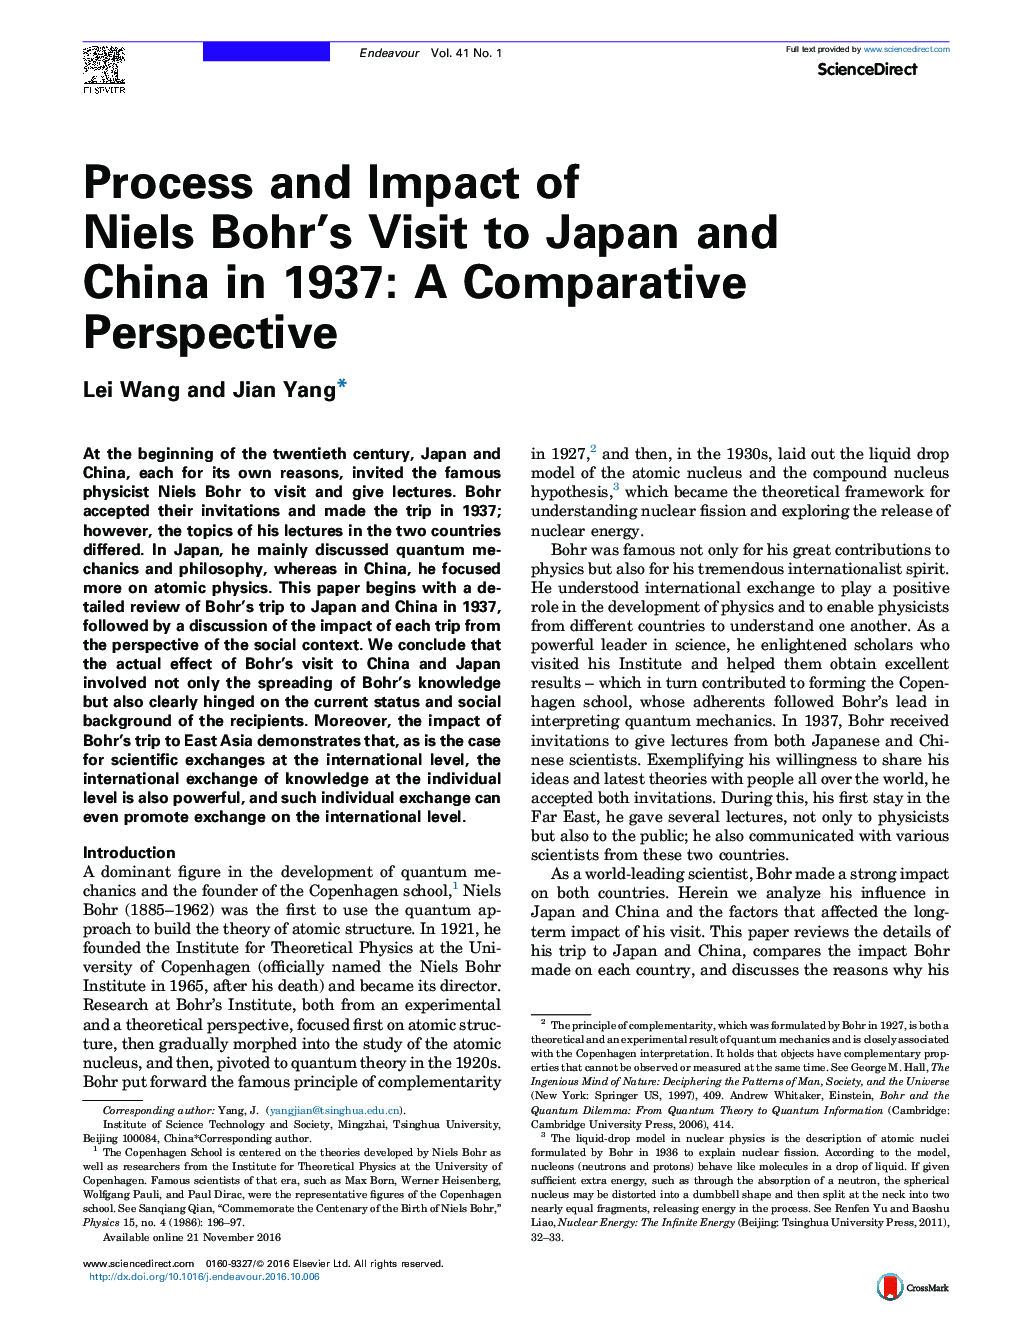 Process and Impact of Niels Bohr's Visit to Japan and China in 1937: A Comparative Perspective